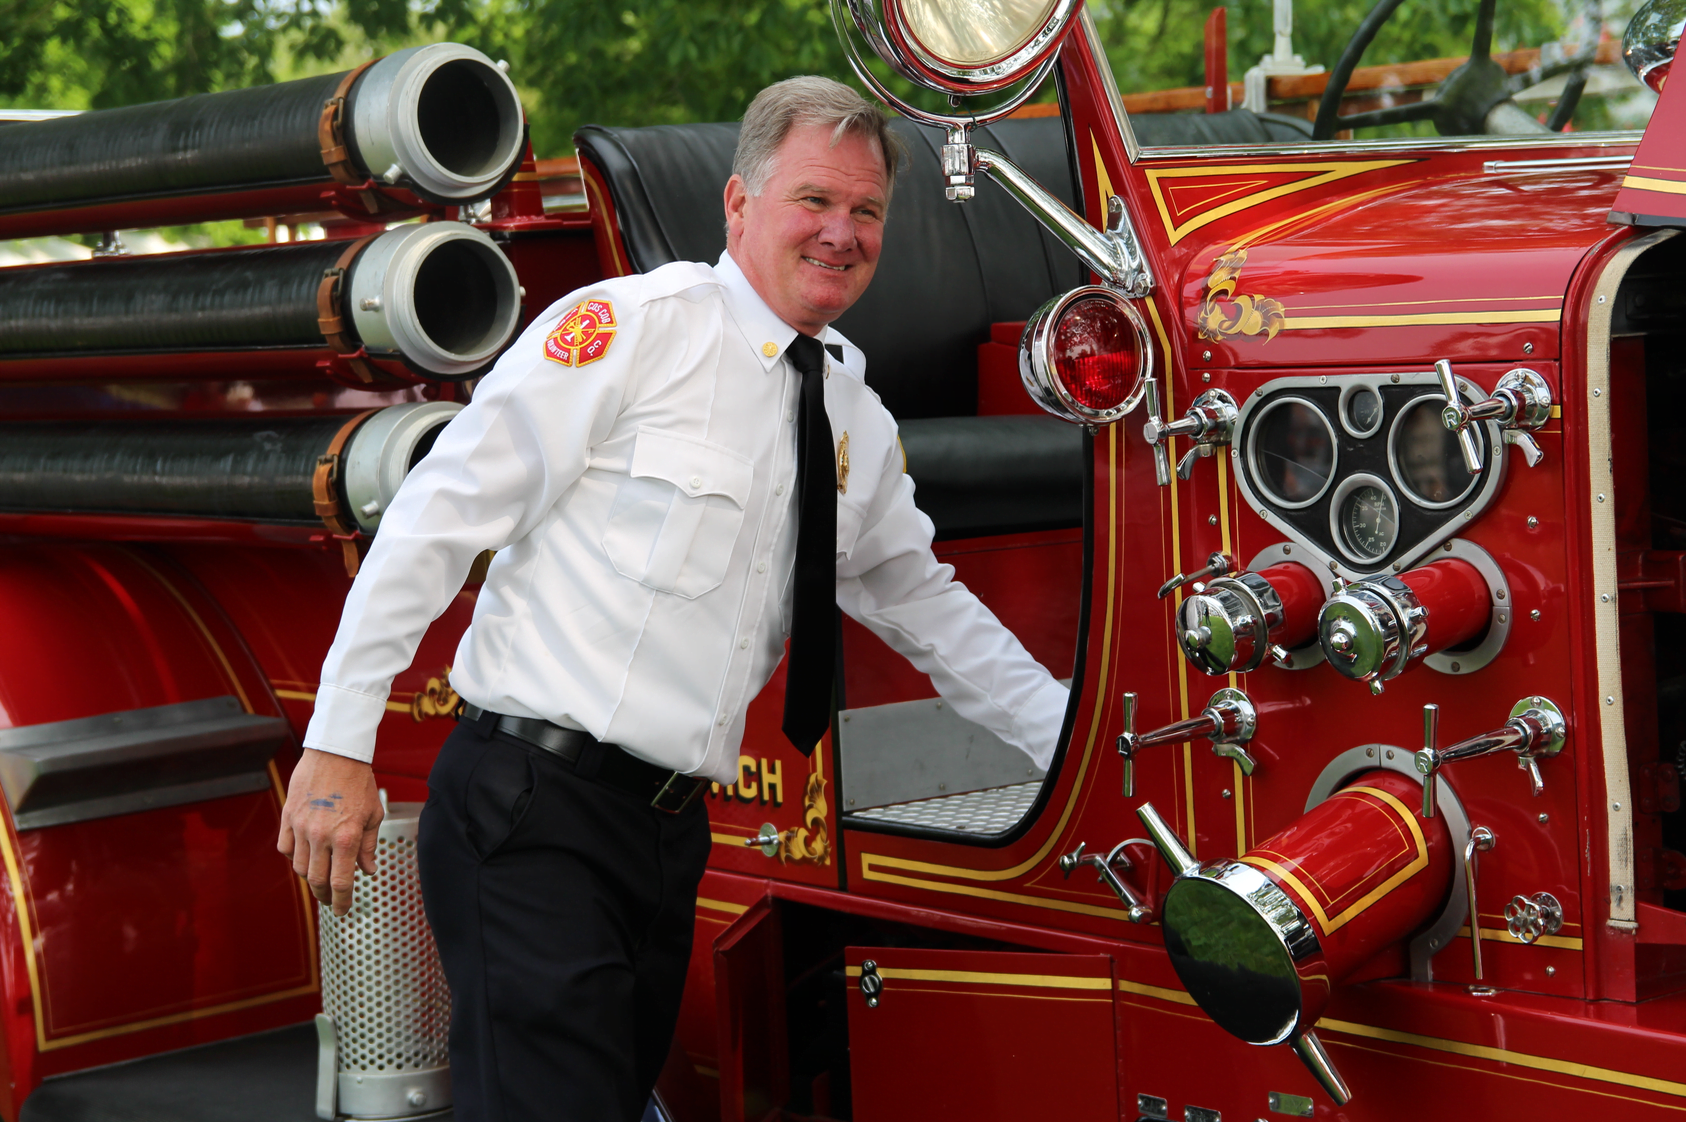 The Cos Cob Volunteer Fire Department is excited to announce the return of a restored 1935 American LaFrance fire engine that was originally in service in Cos Cob from 1935 to 1963